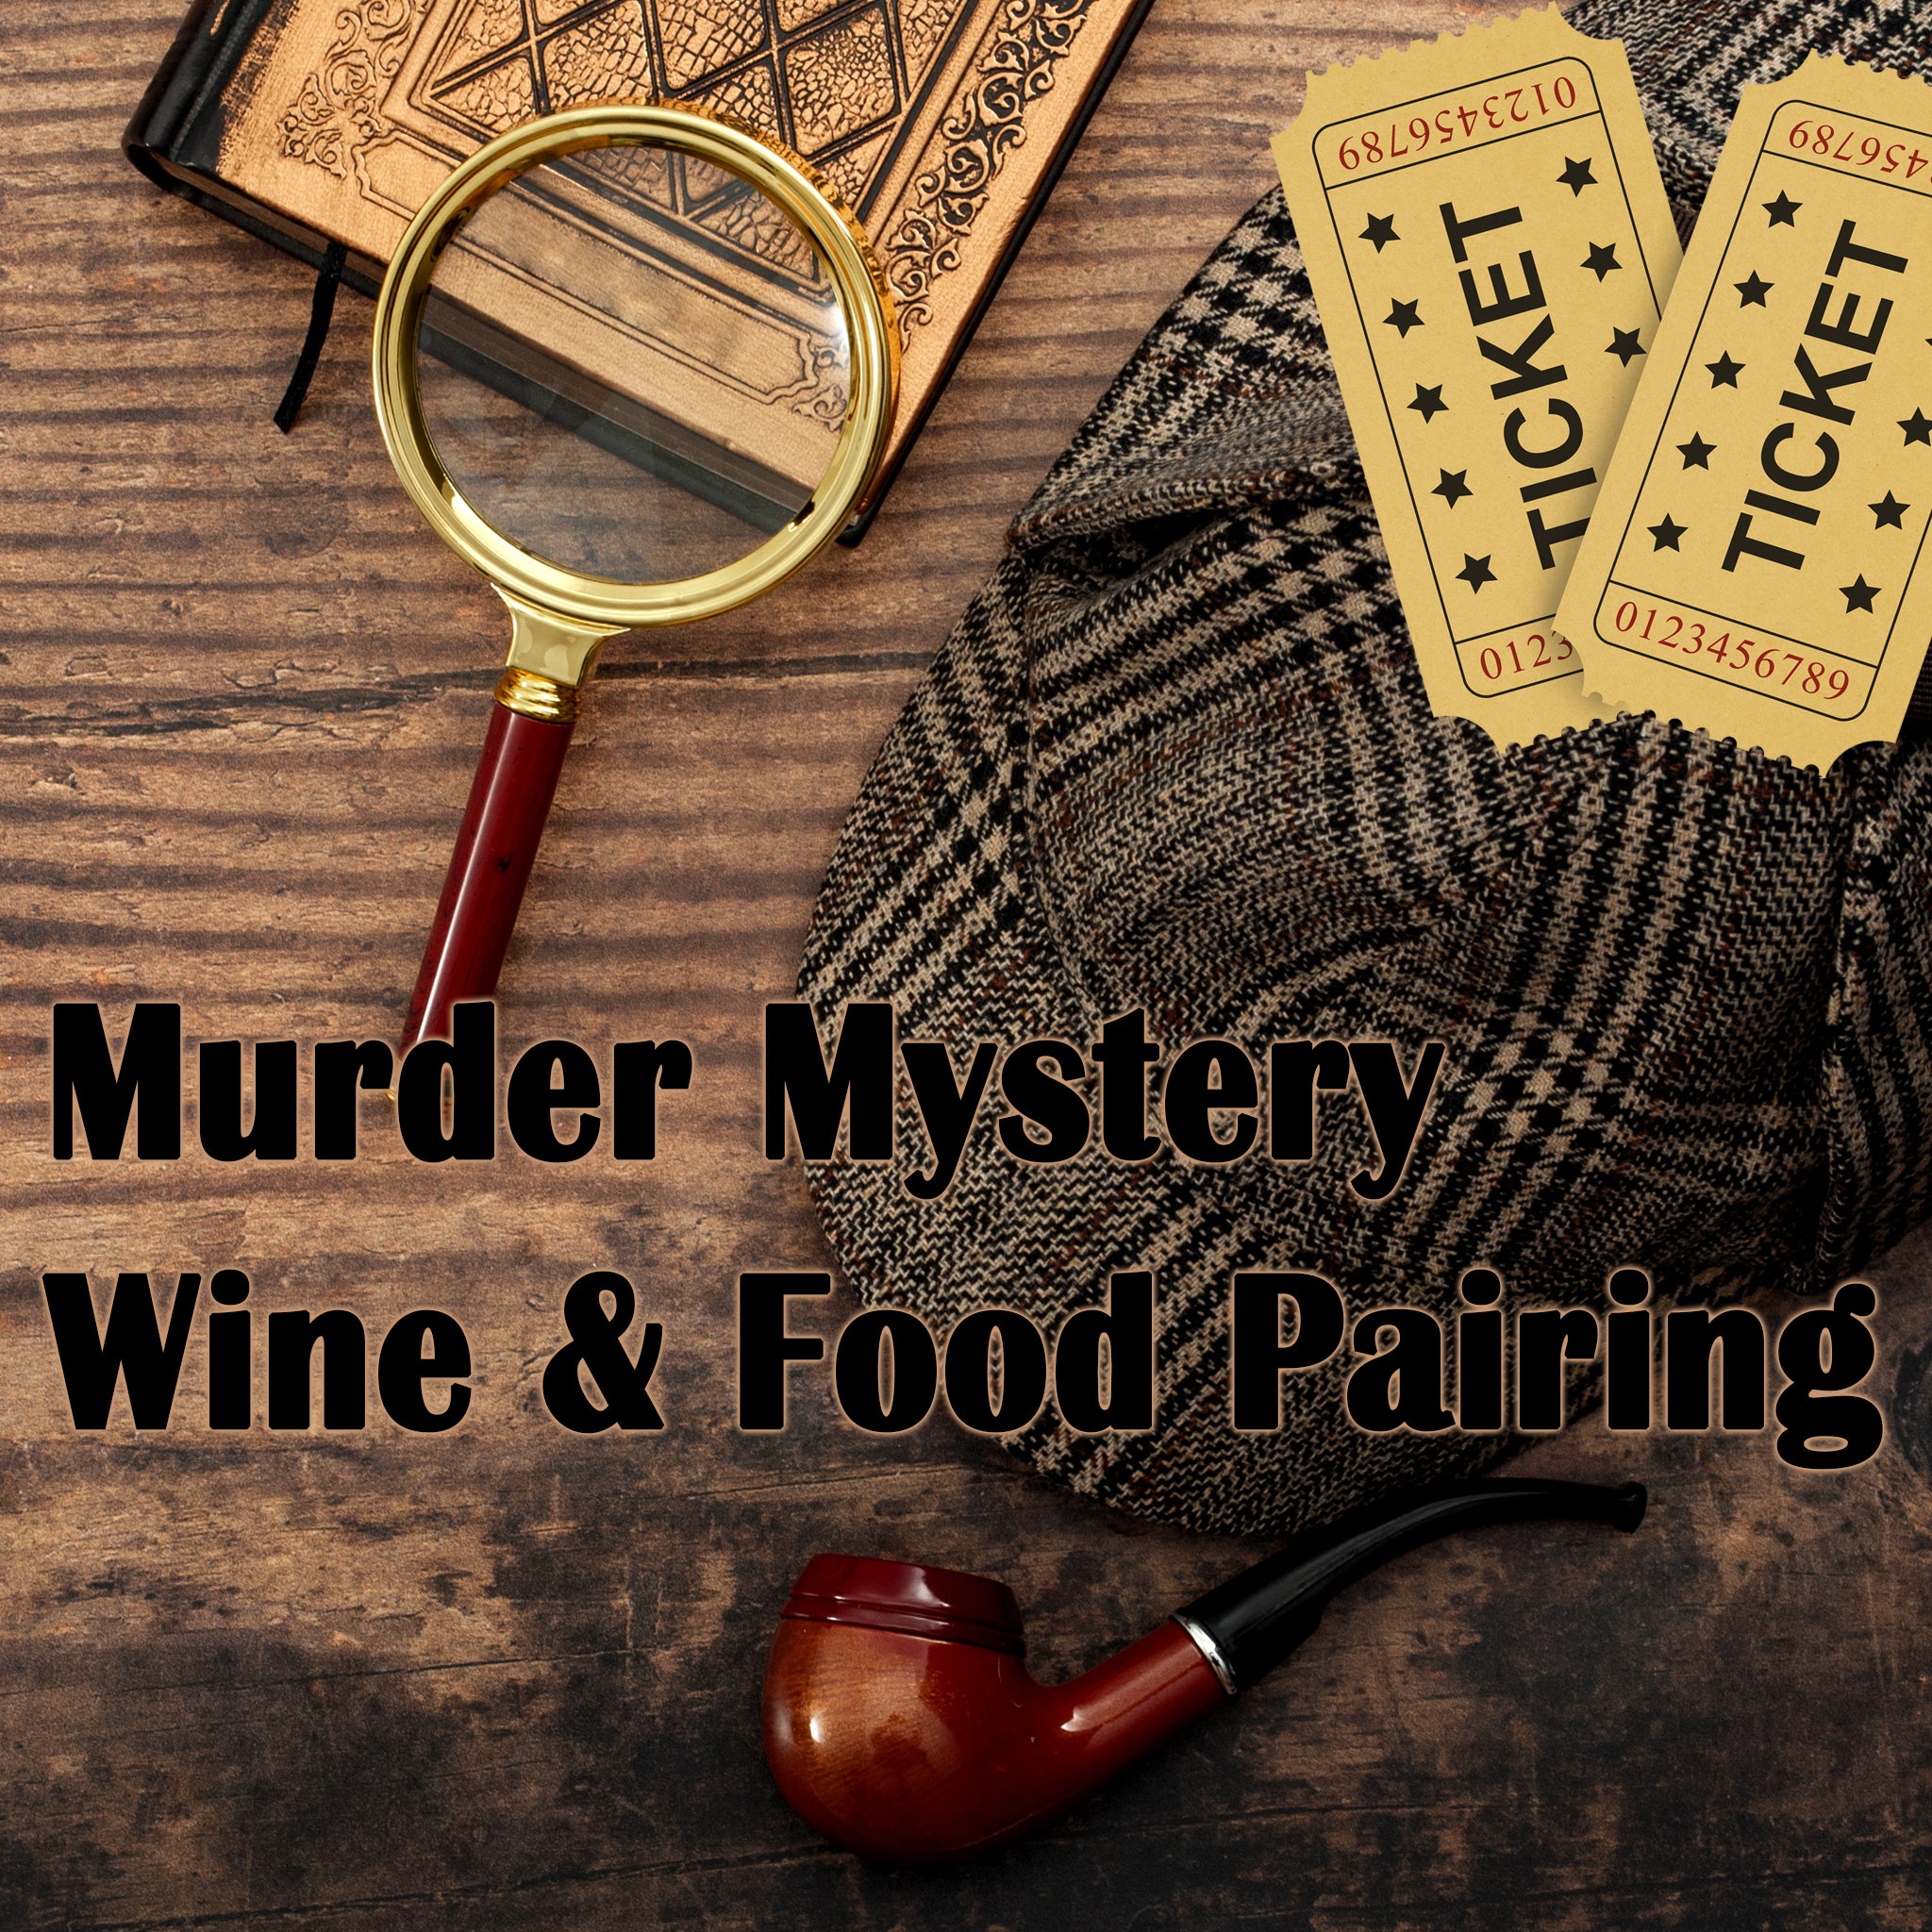 Murder Mystery Dinner: Sunday May 5, 2024 at 2 PM